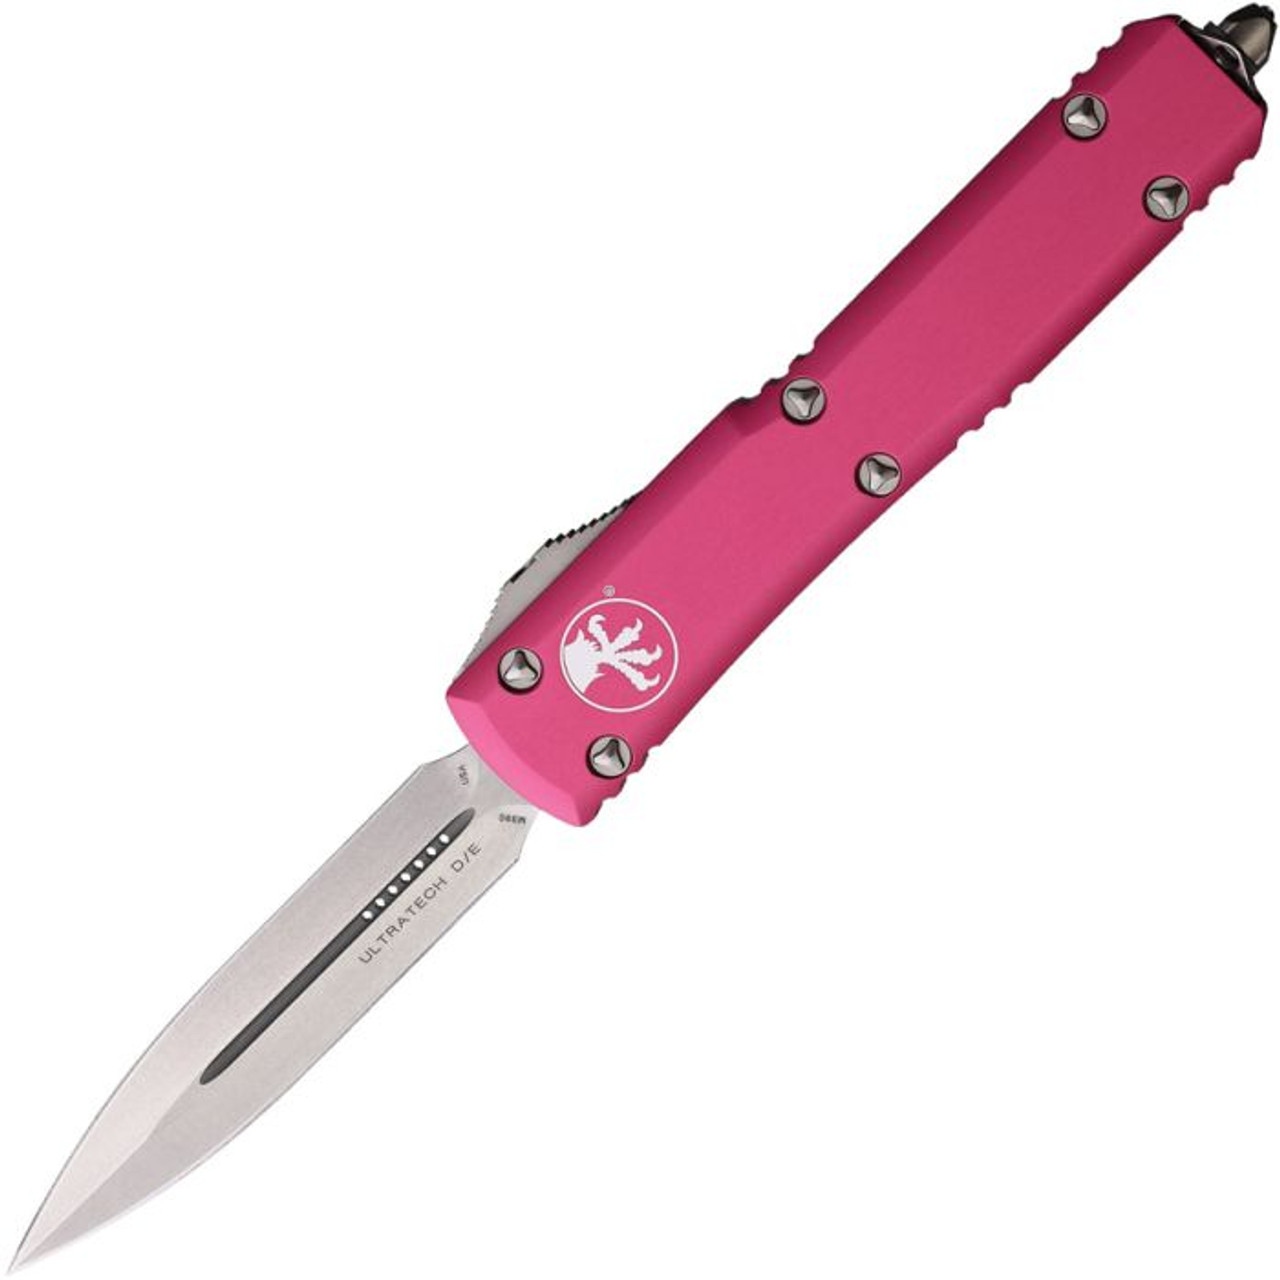 Microtech Ultratech D/E (MCT12210PK) 3.5" Bohler M390 Stonewashed Double Edged Dagger Plain Blade, Pink Anodized Aluminum